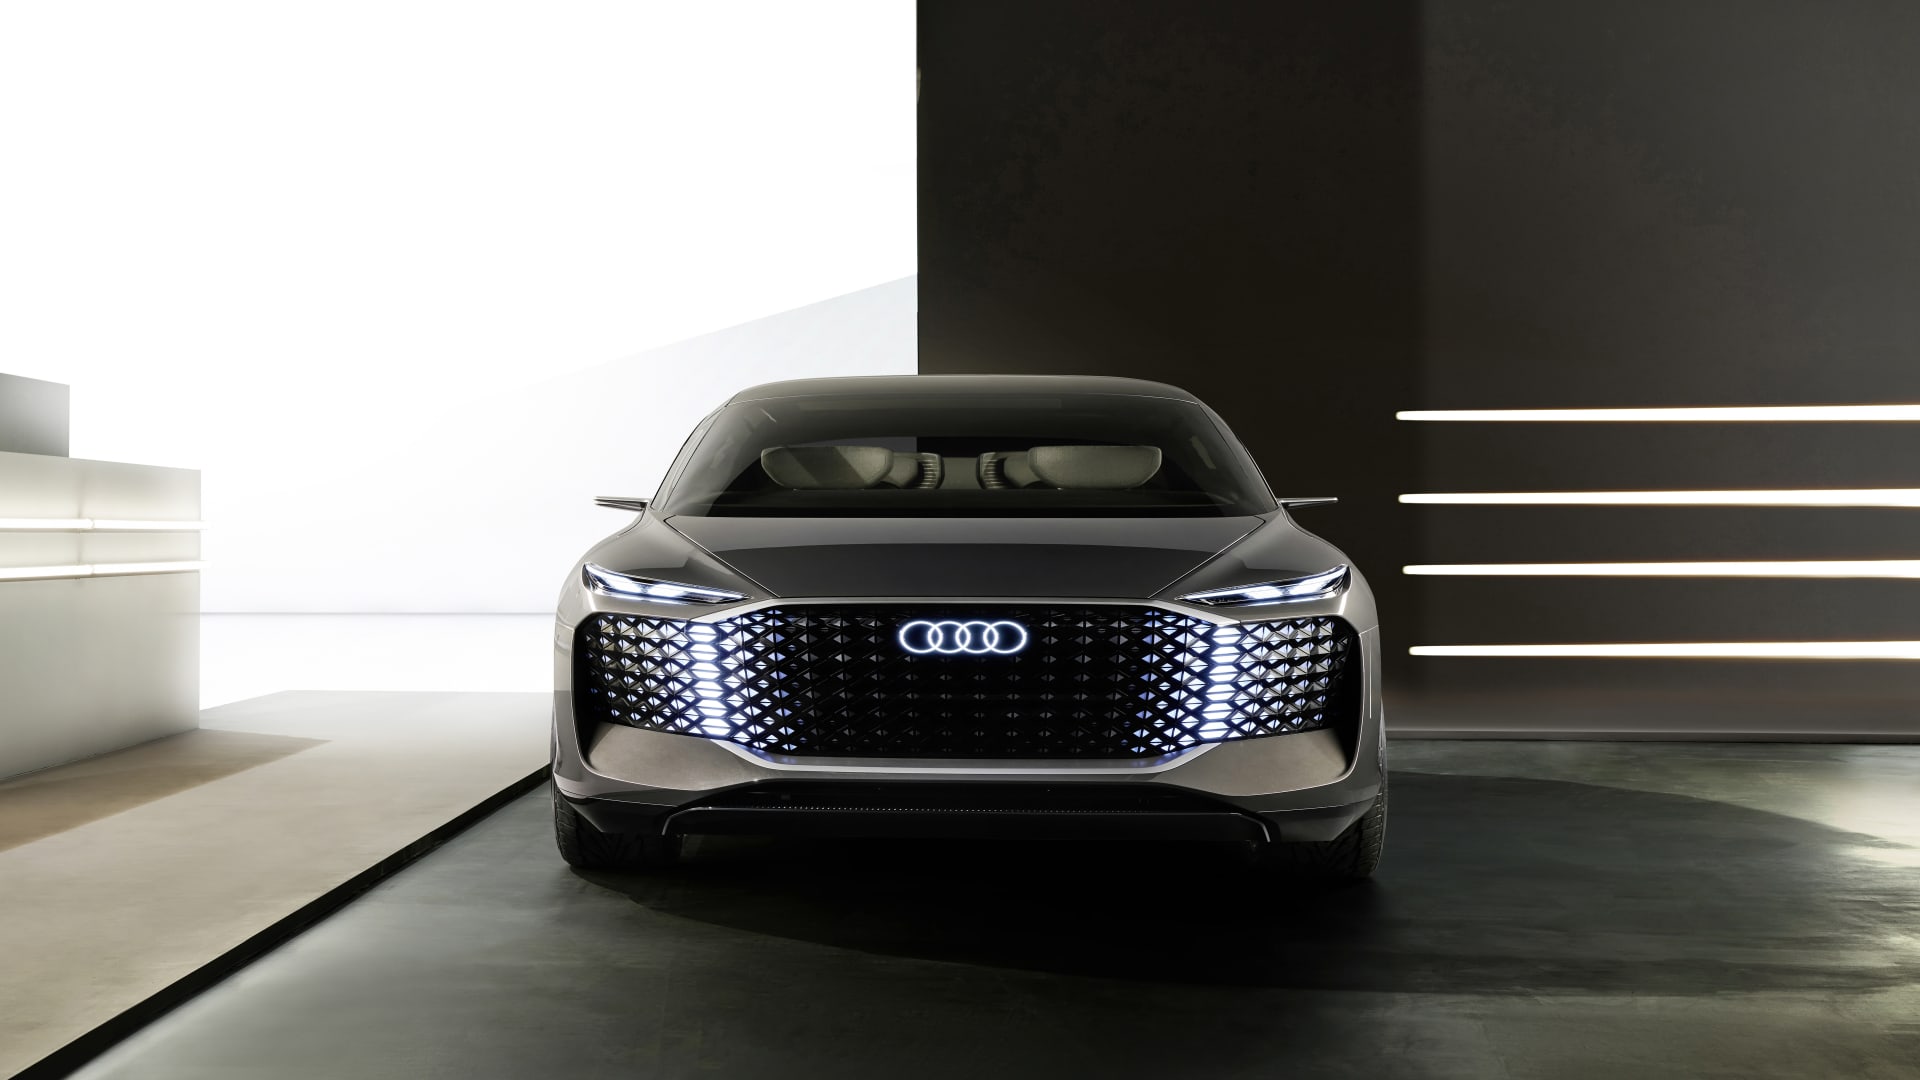 Audi’s new concept car is a ‘lounge on wheels’ for city travelers